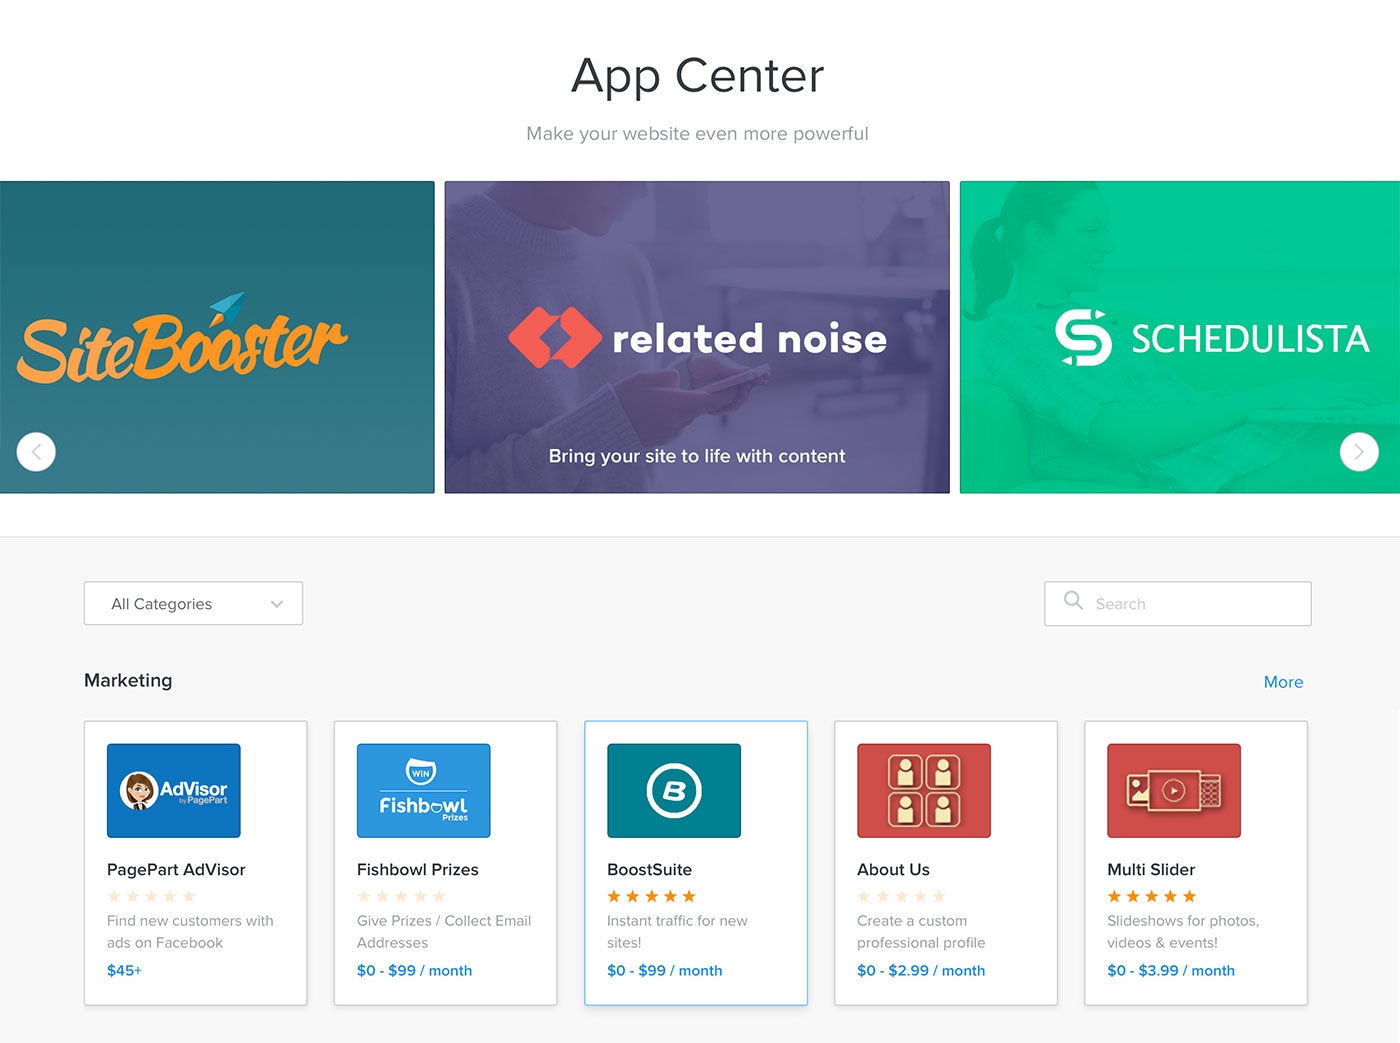 Weebly App Center